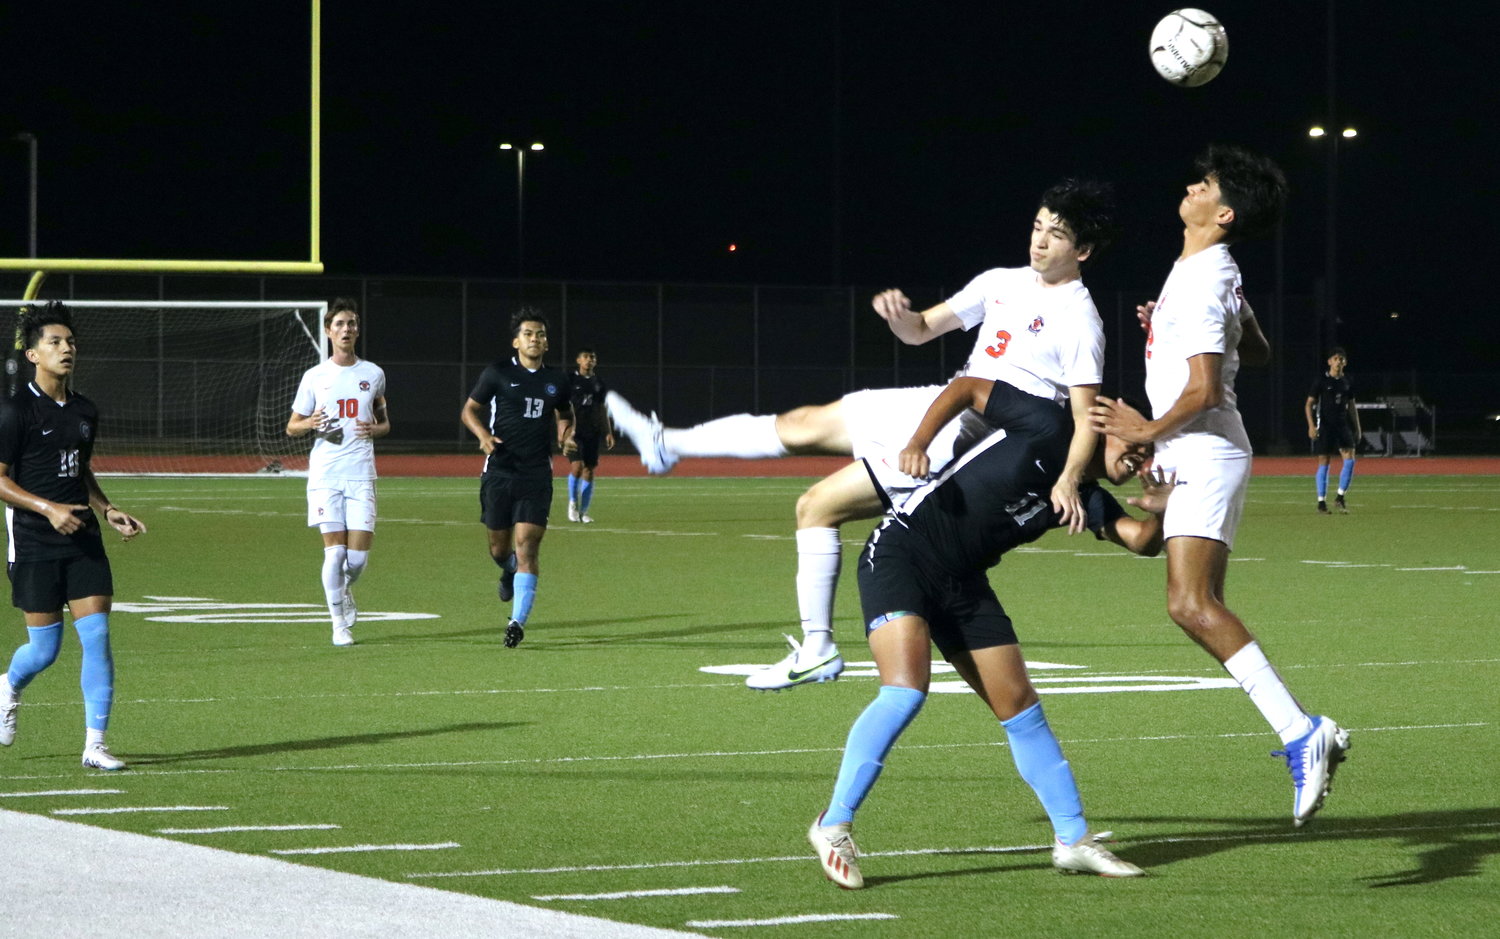 Jose Dominguez and Diego Flamenco collide while going for a header during Tuesday's District 19-6A game between Seven Lakes and Paetow at the Paetow soccer field.